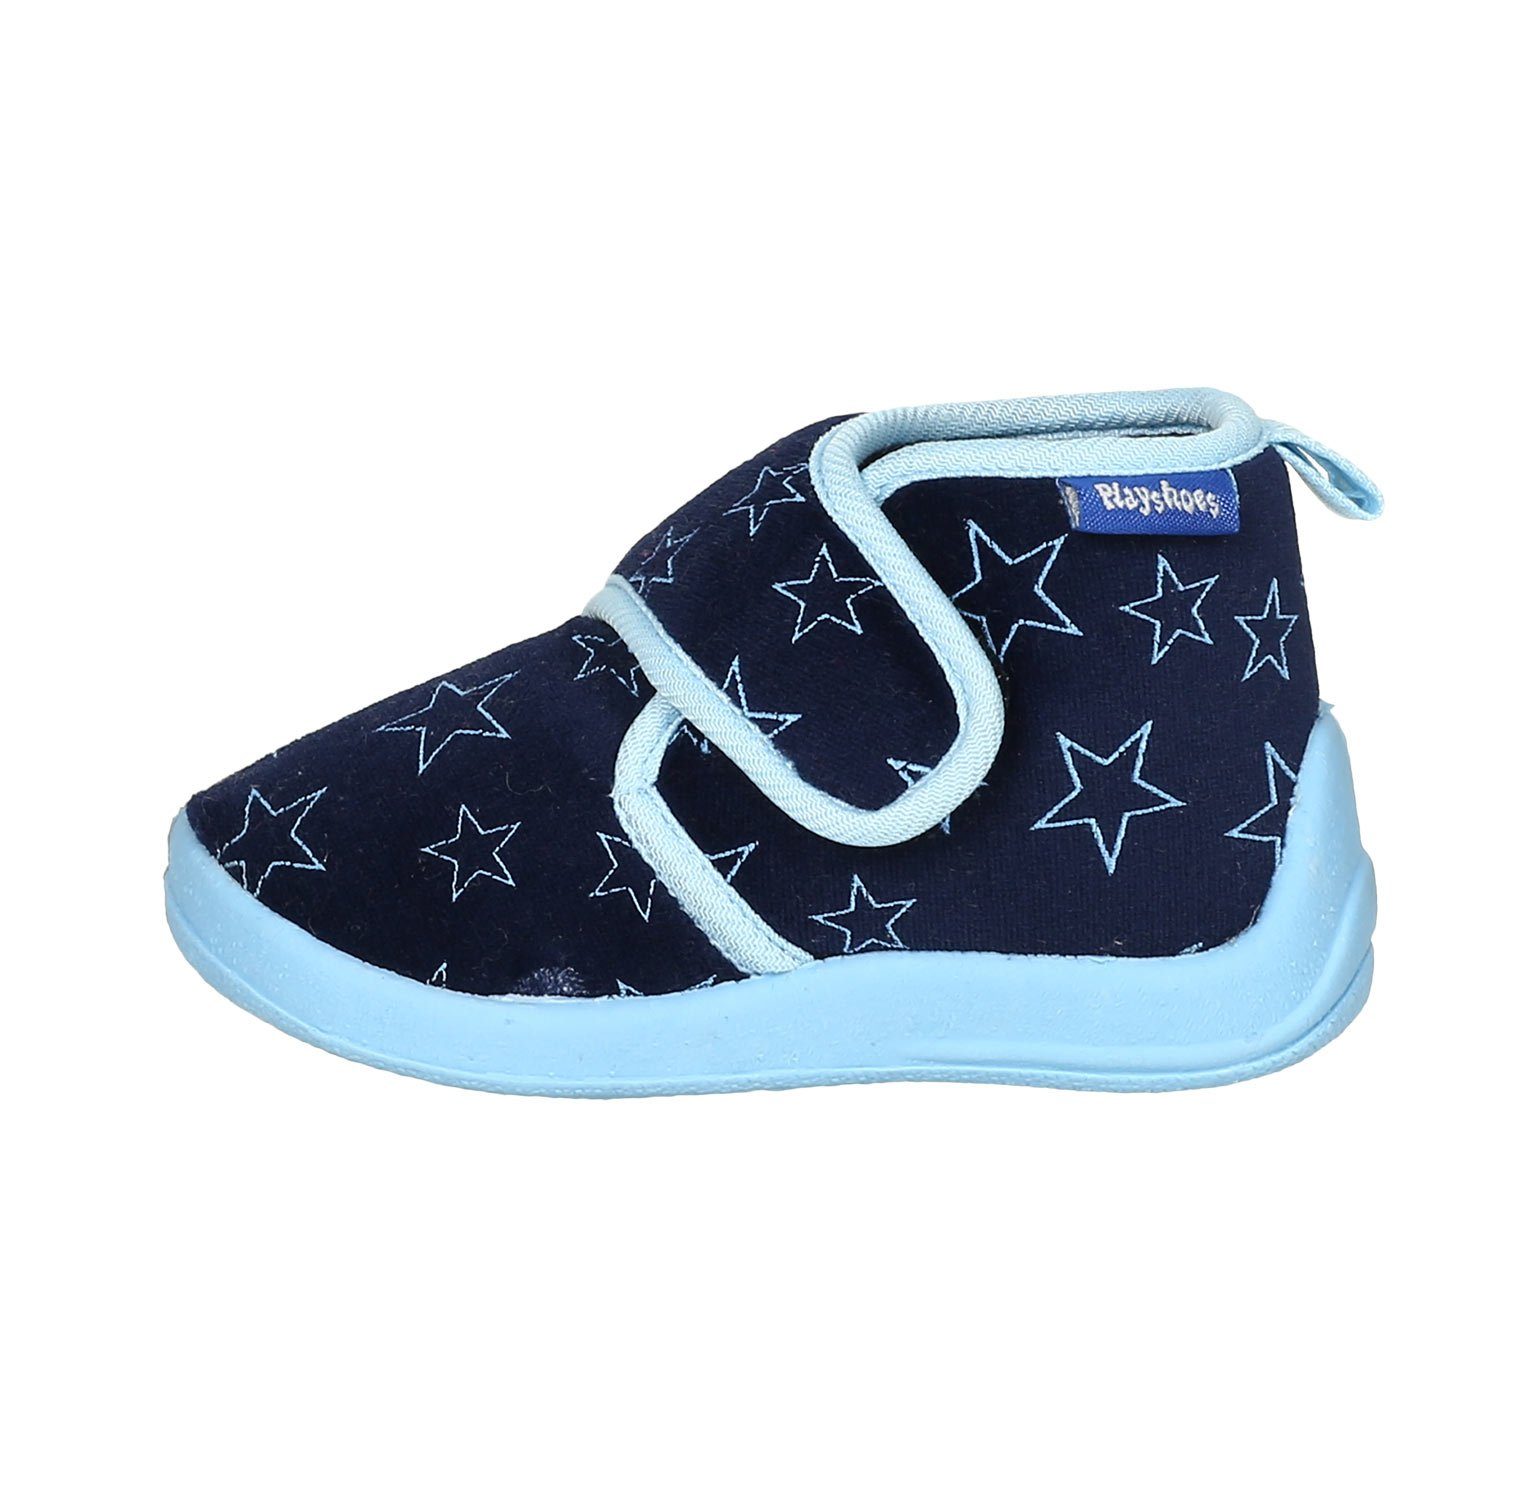 Hausschuh Marine Playshoes Pastell Hausschuh